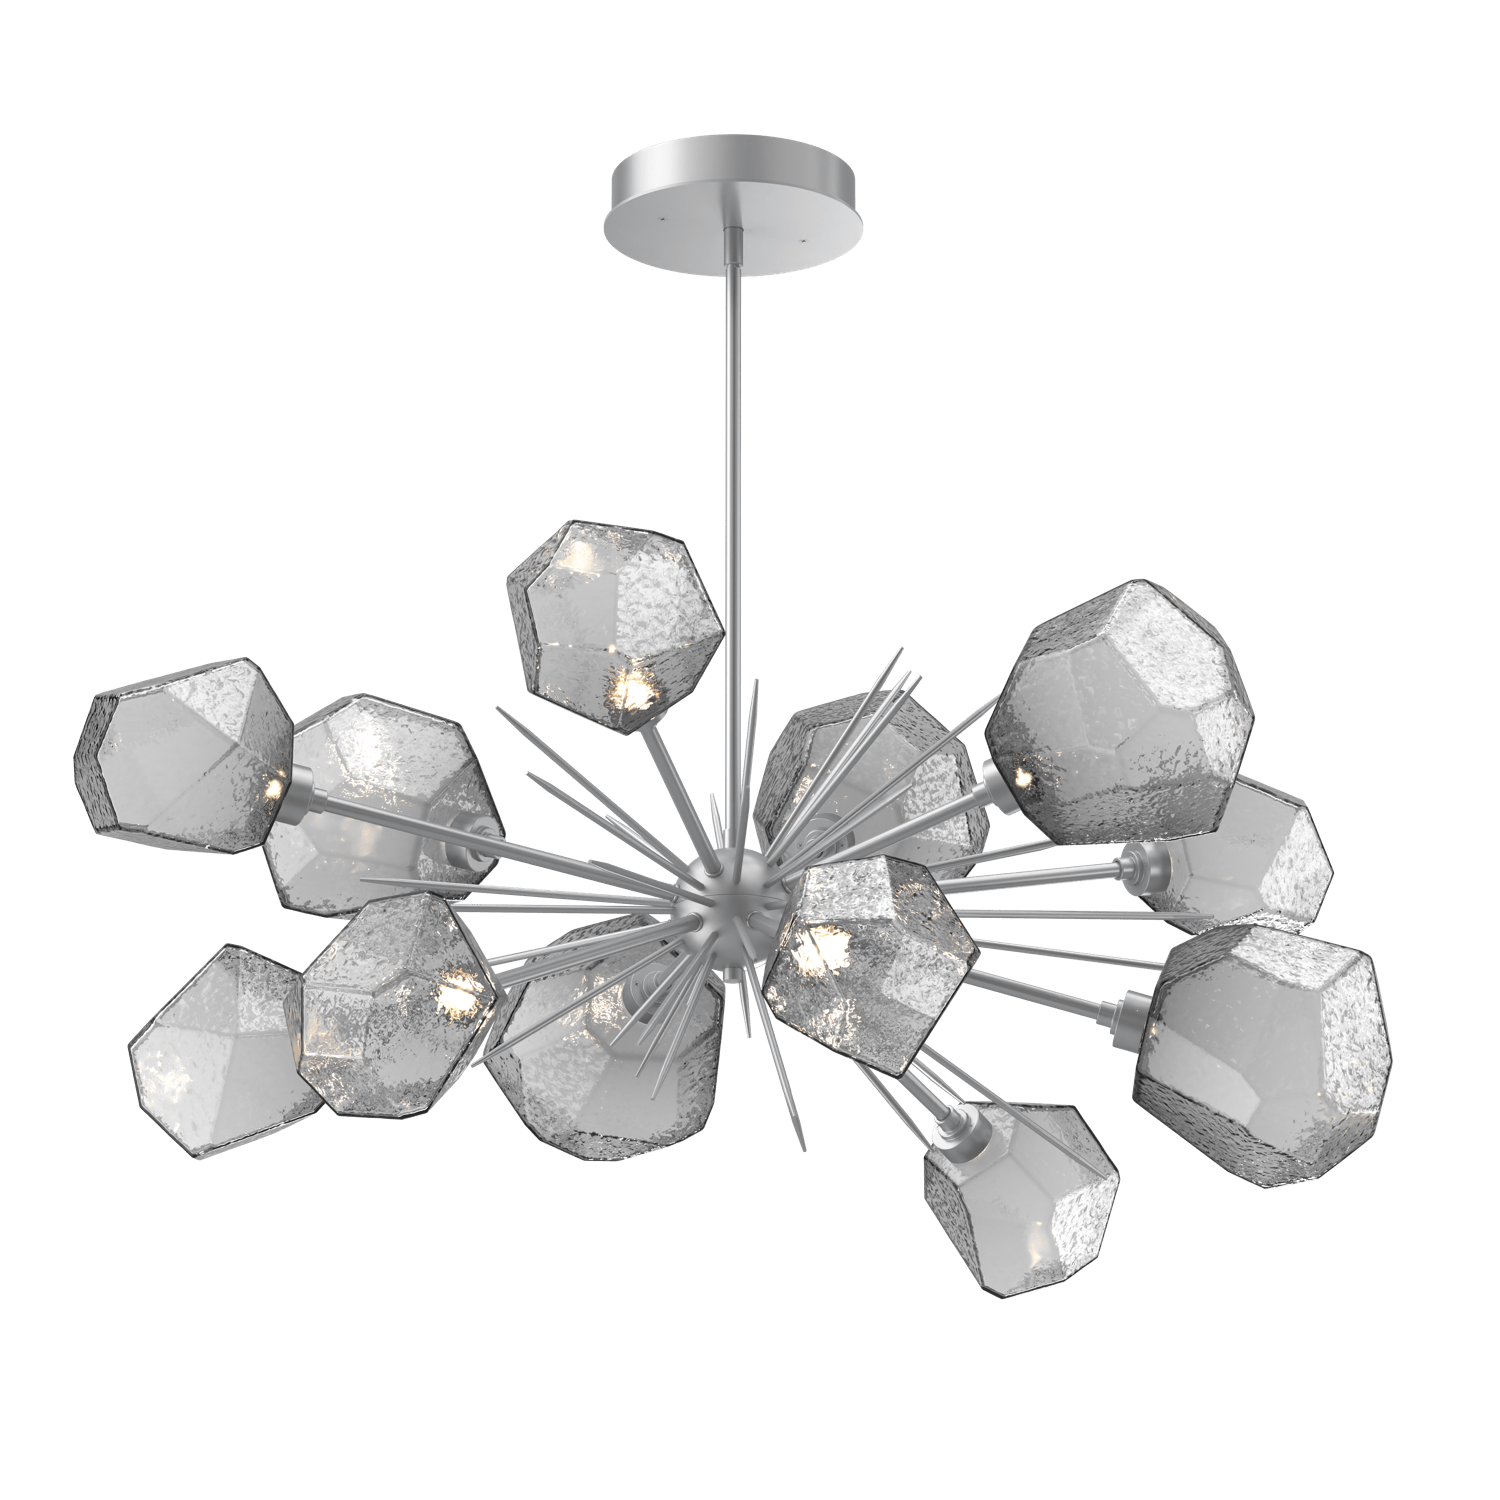 PLB0039-0D-CS-S-Hammerton-Studio-Gem-43-inch-oval-starburst-chandelier-with-classic-silver-finish-and-smoke-blown-glass-shades-and-LED-lamping